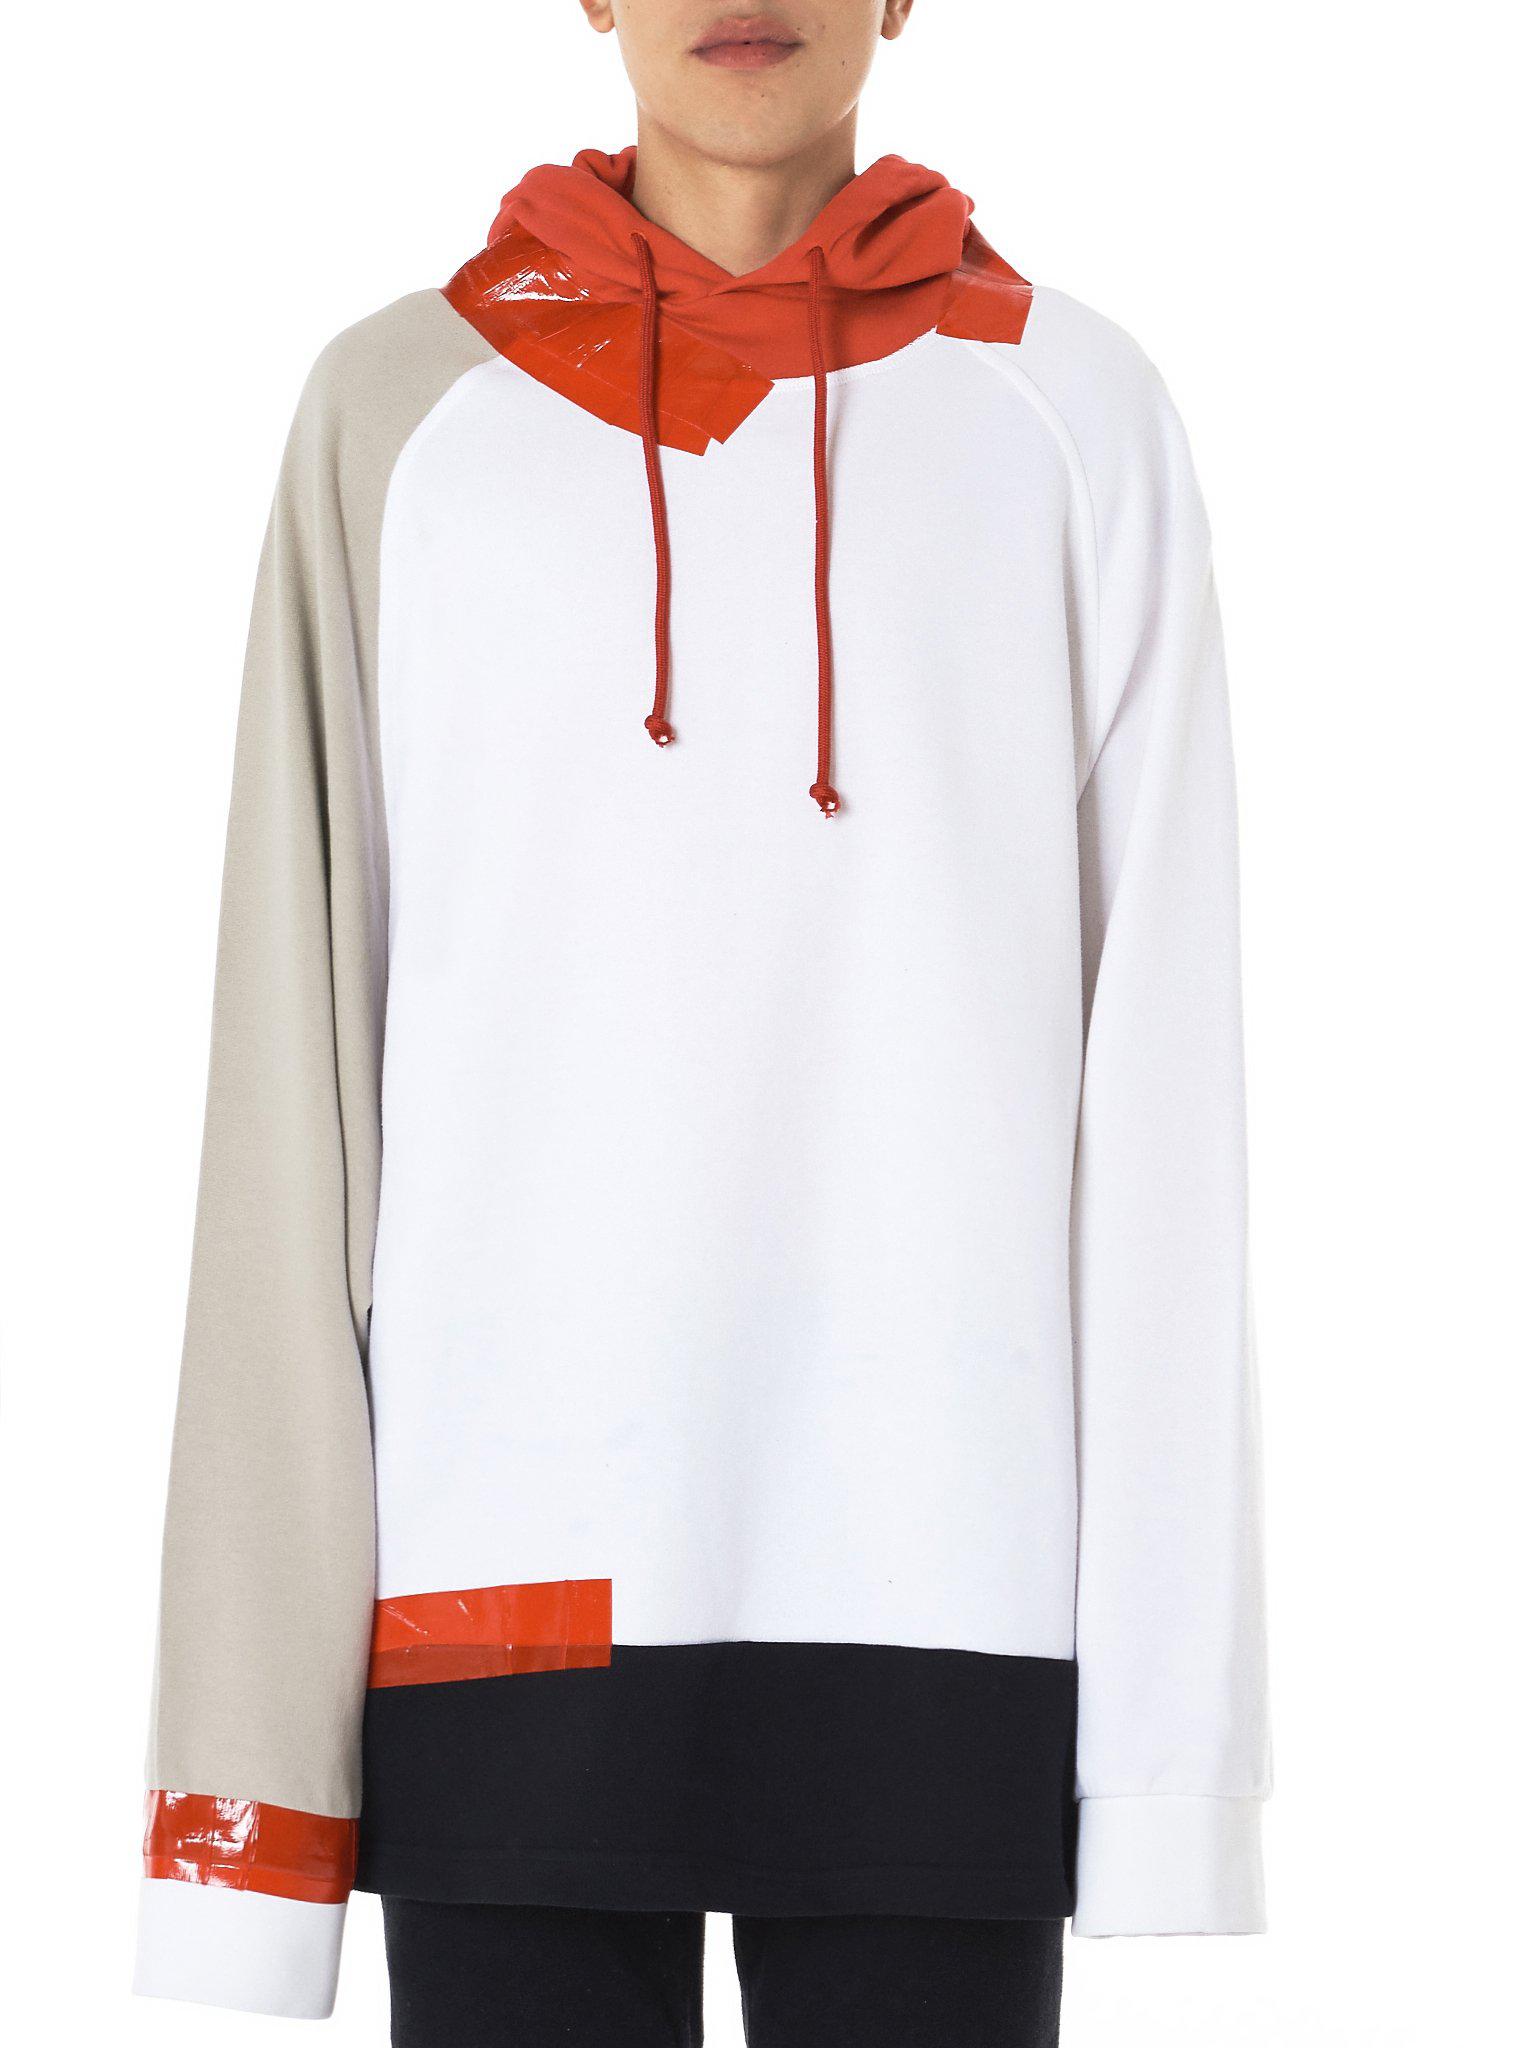 Lyst - Raf Simons Duct Tape Applique Assemblage Hoodie in White for Men